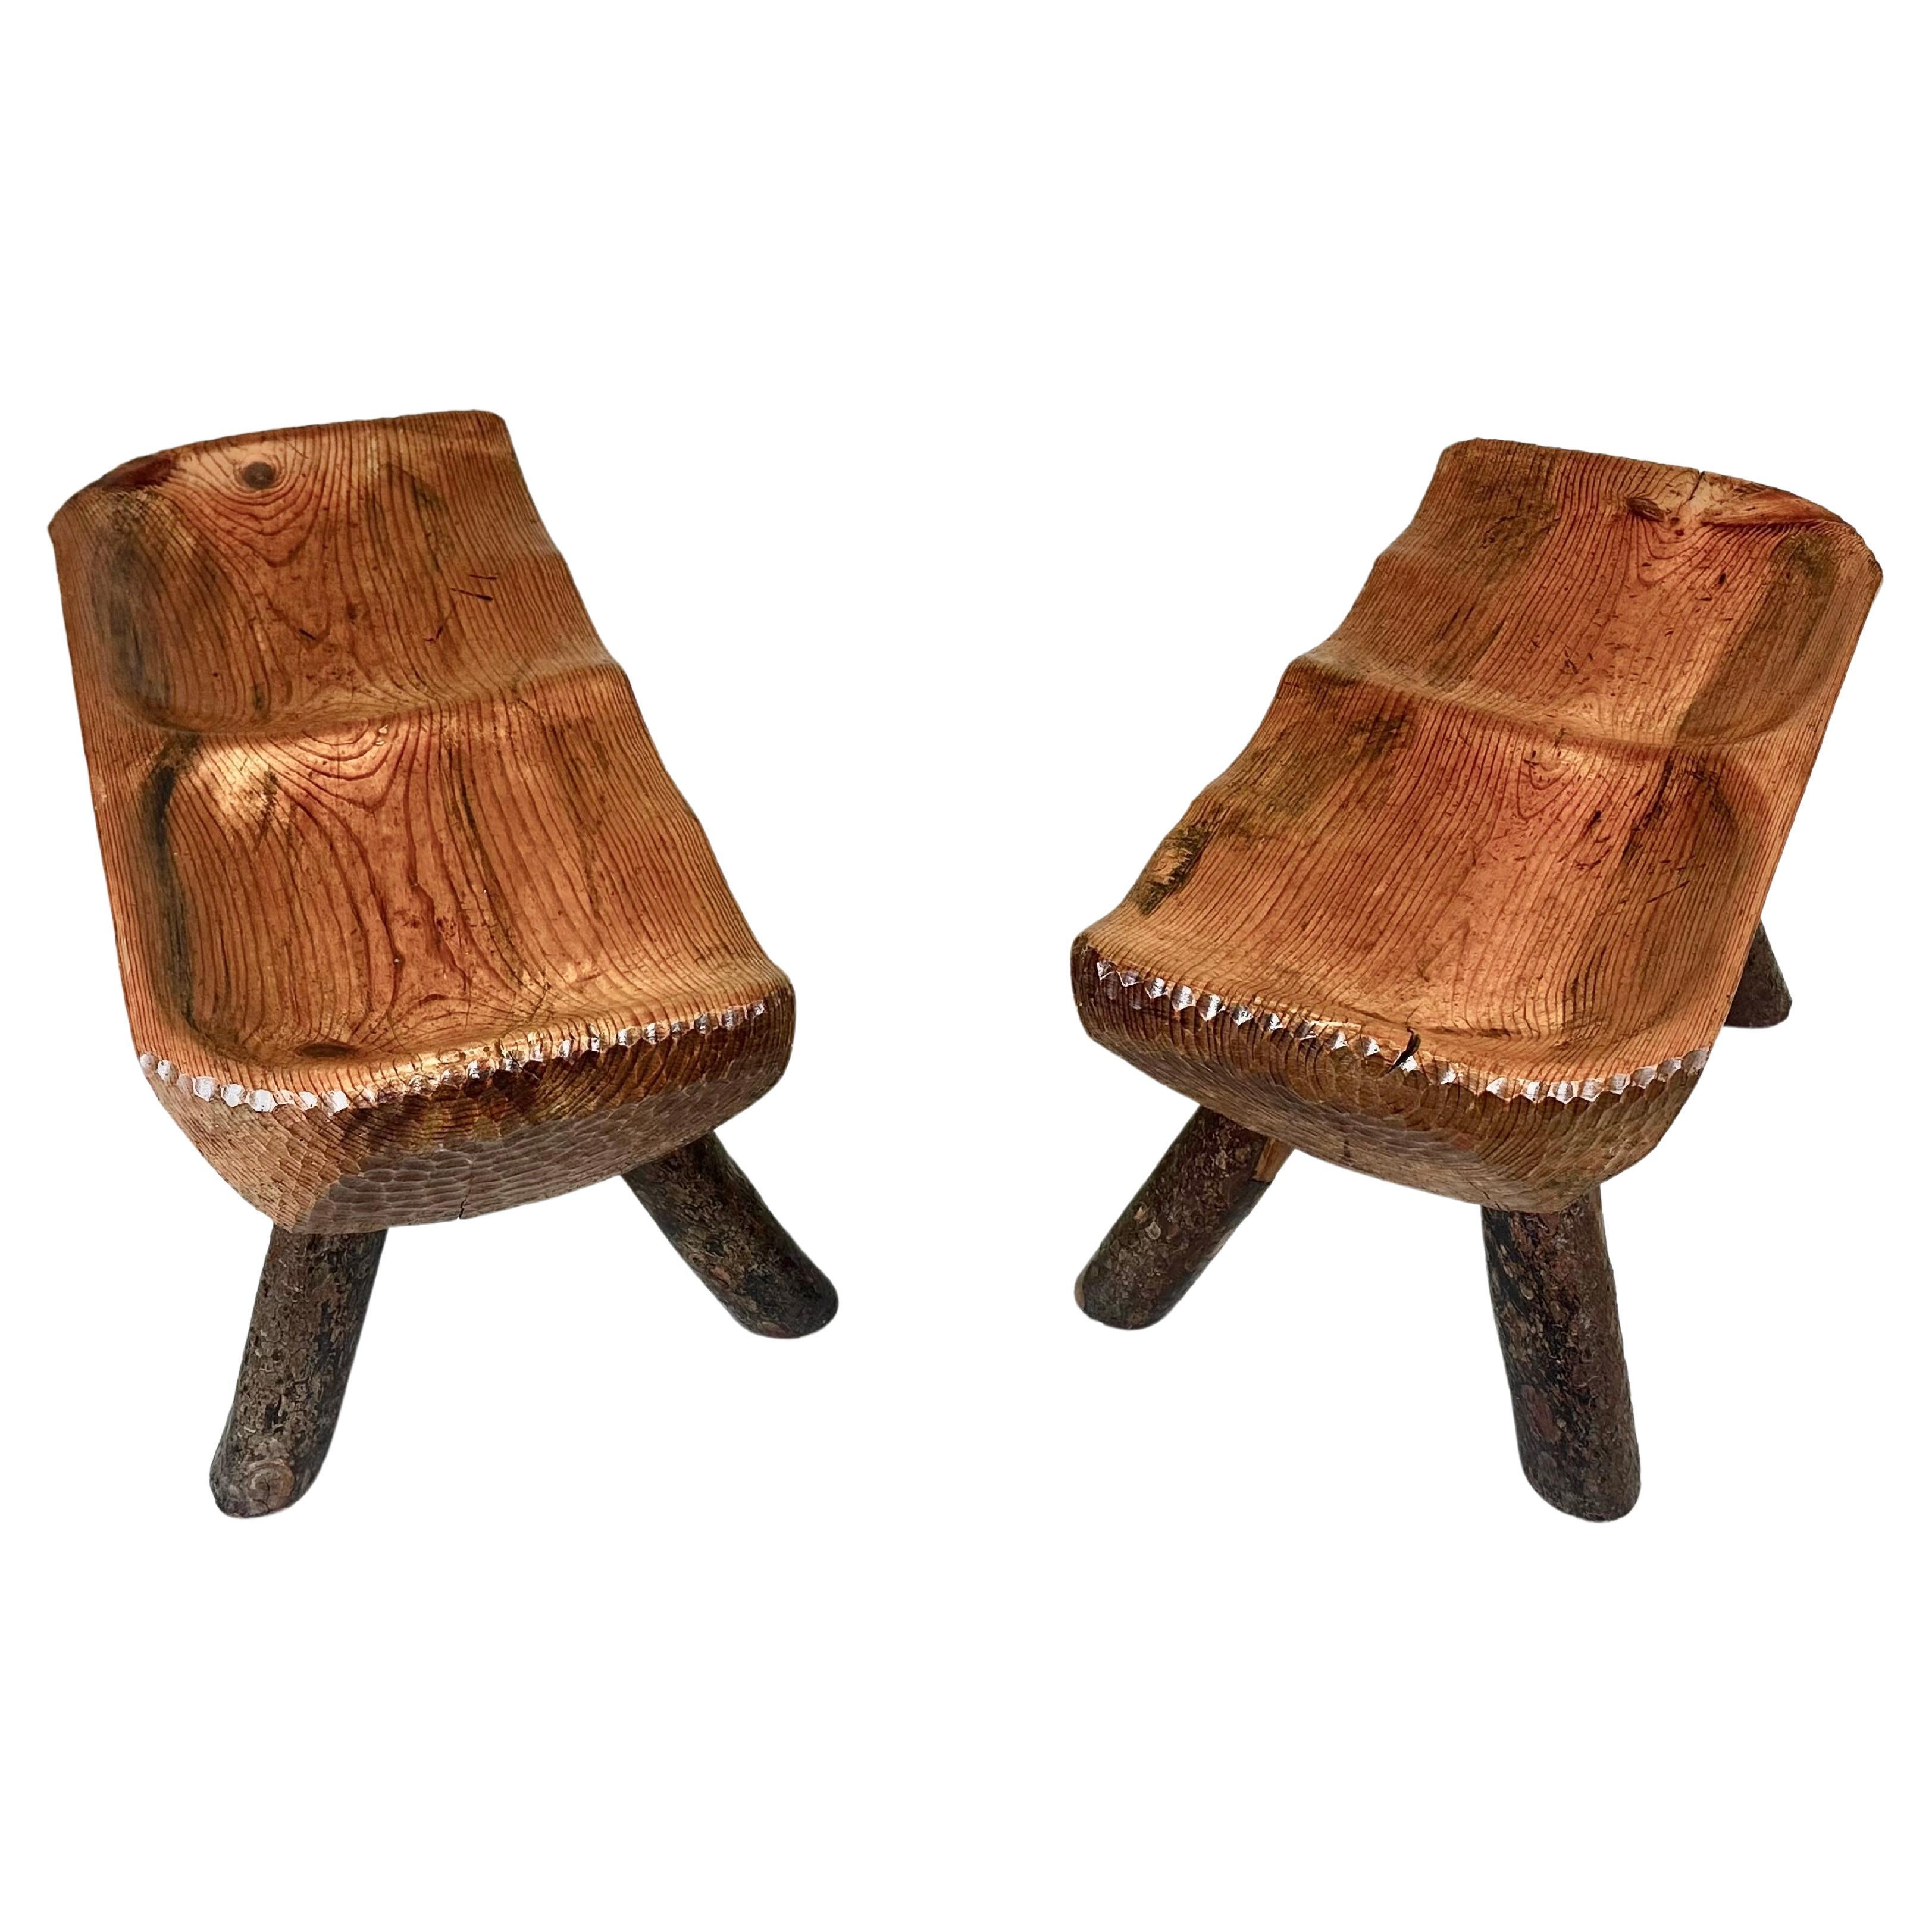 2 Rare, Hand Carved Cypress, Italian Alpine Benches circa 1950. The pieces convey the Mid-Century Modern Craftsman aesthetic with its emphasis on hand made pieces, using honest materials and reflecting sober, modern sensibilities in conjunction with